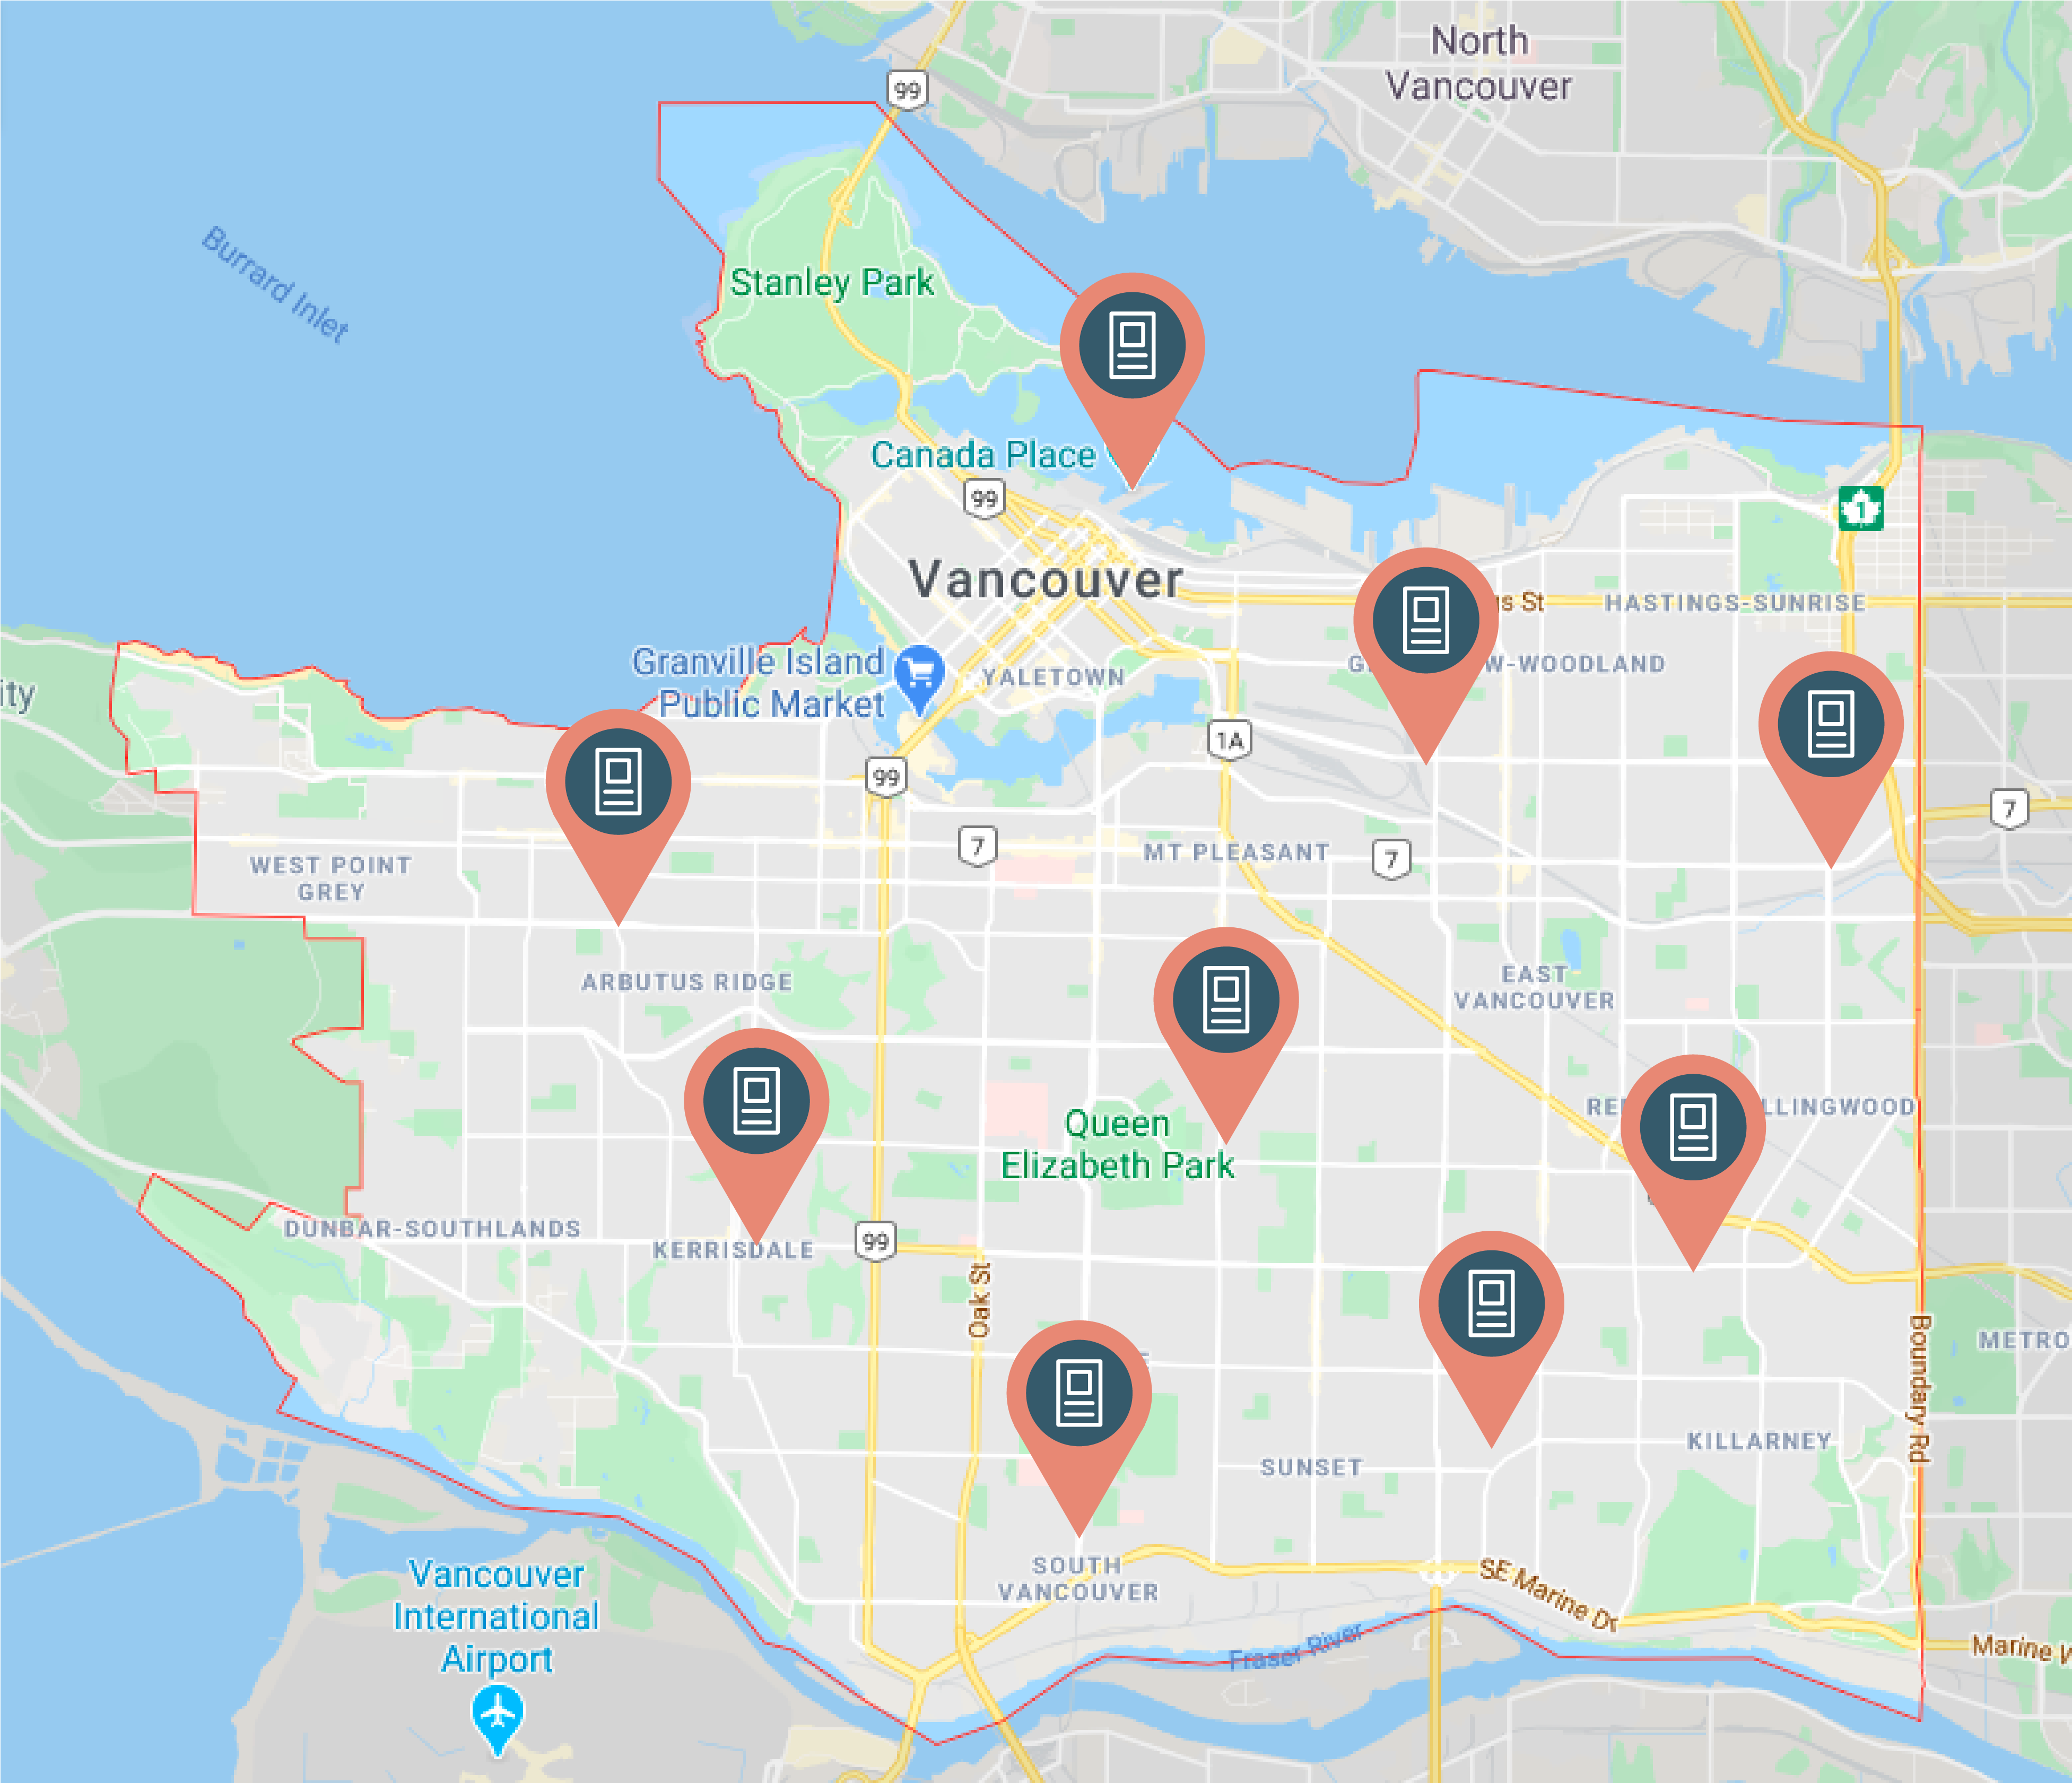 Map of vancouver with locations of devices